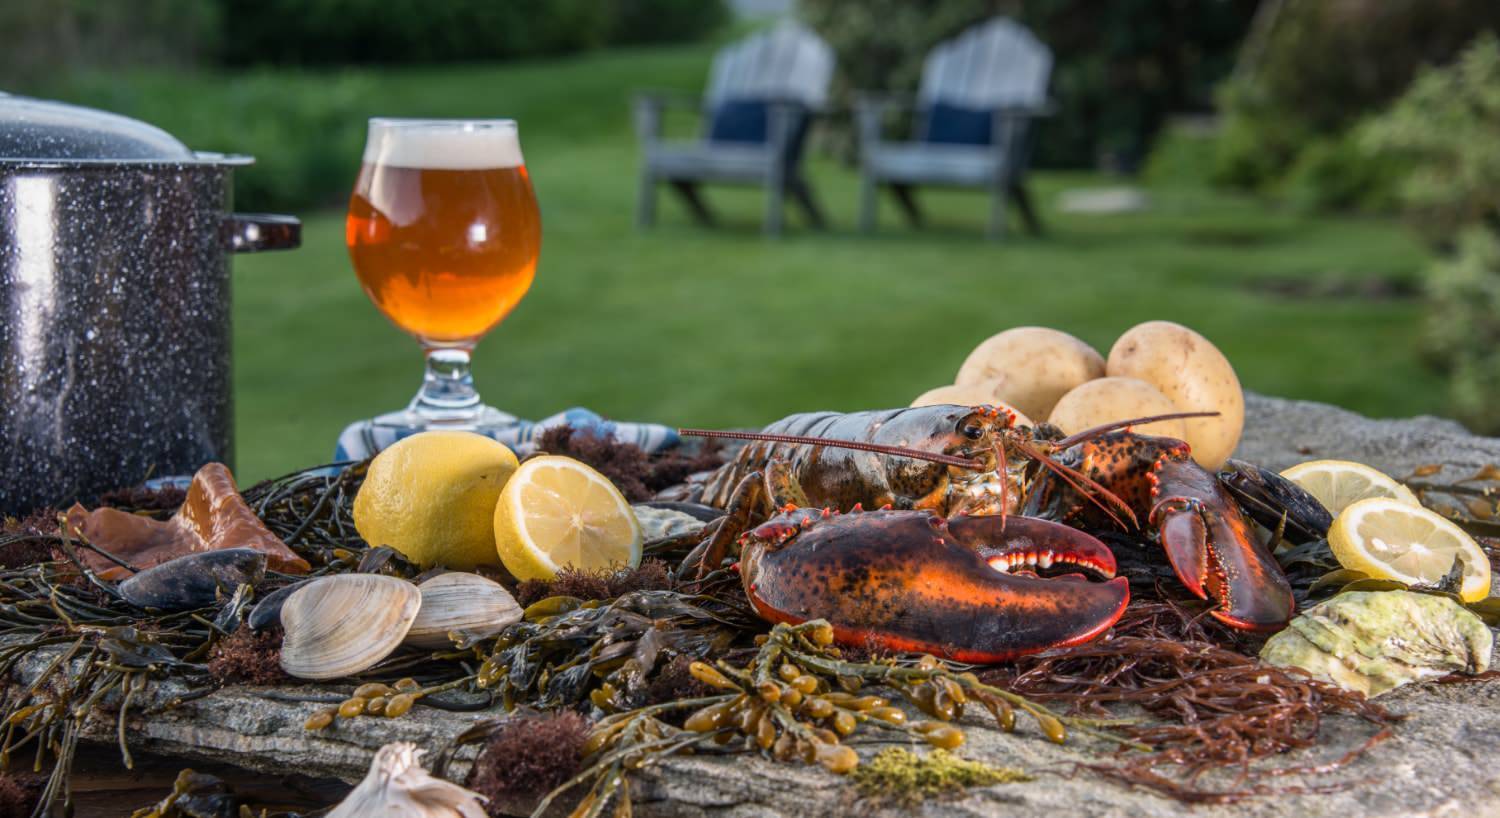 Close up view of large flat rock filled with lobster, clams, potatoes, and lemon slices and a glass of beer and large pot on the side